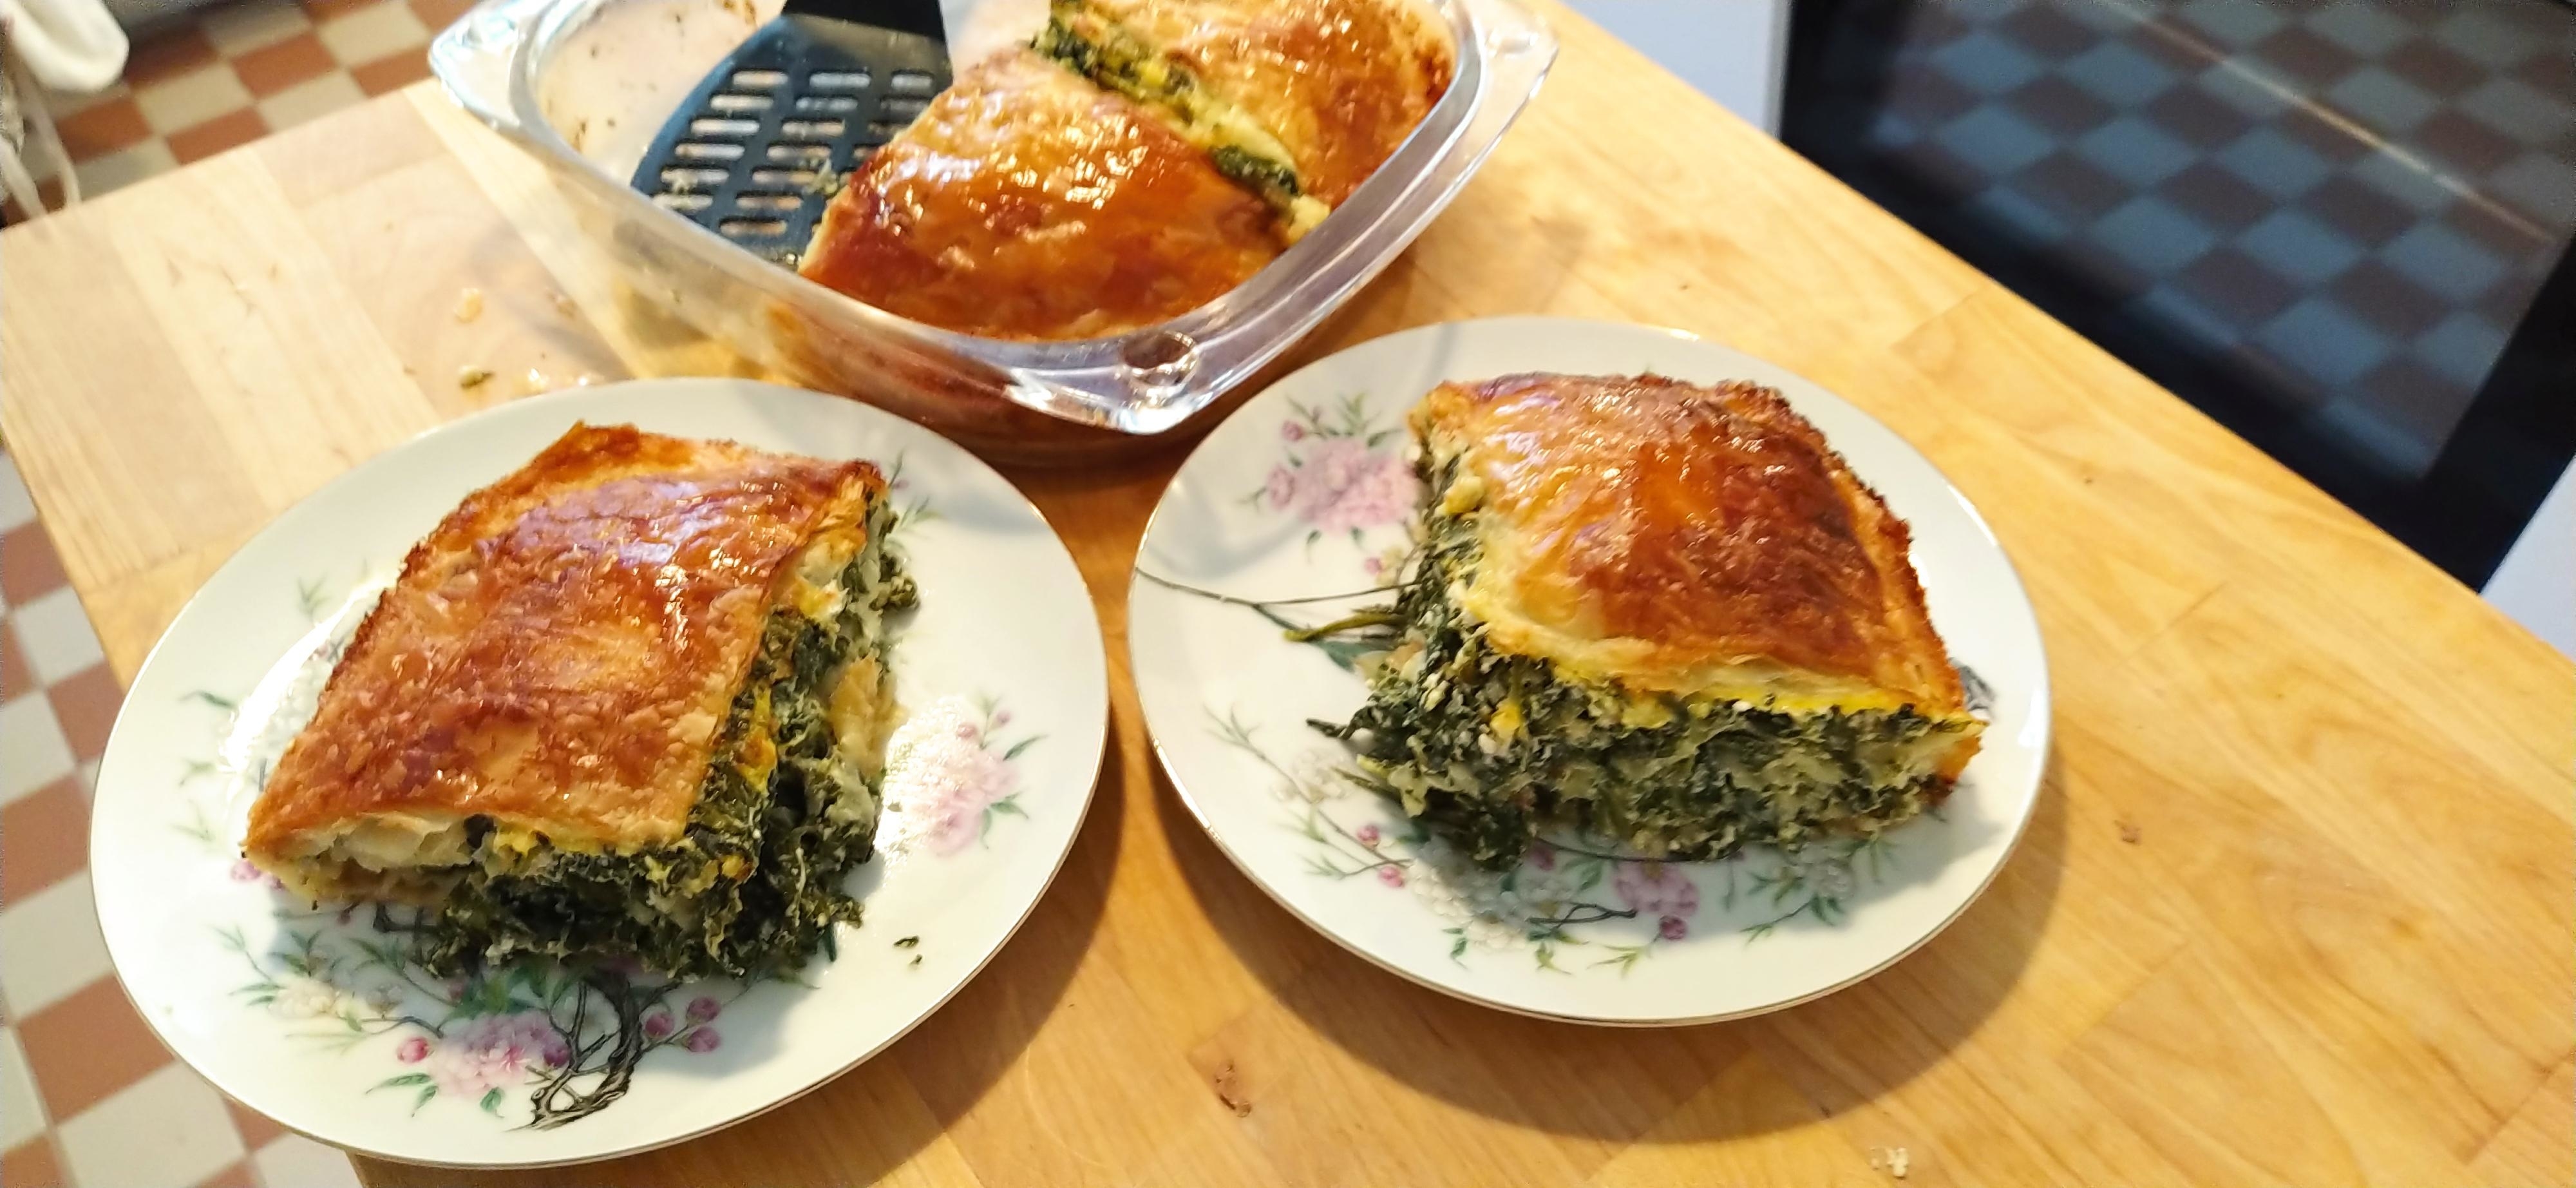 Two plates with slices of spinach pie on a kitchen counter